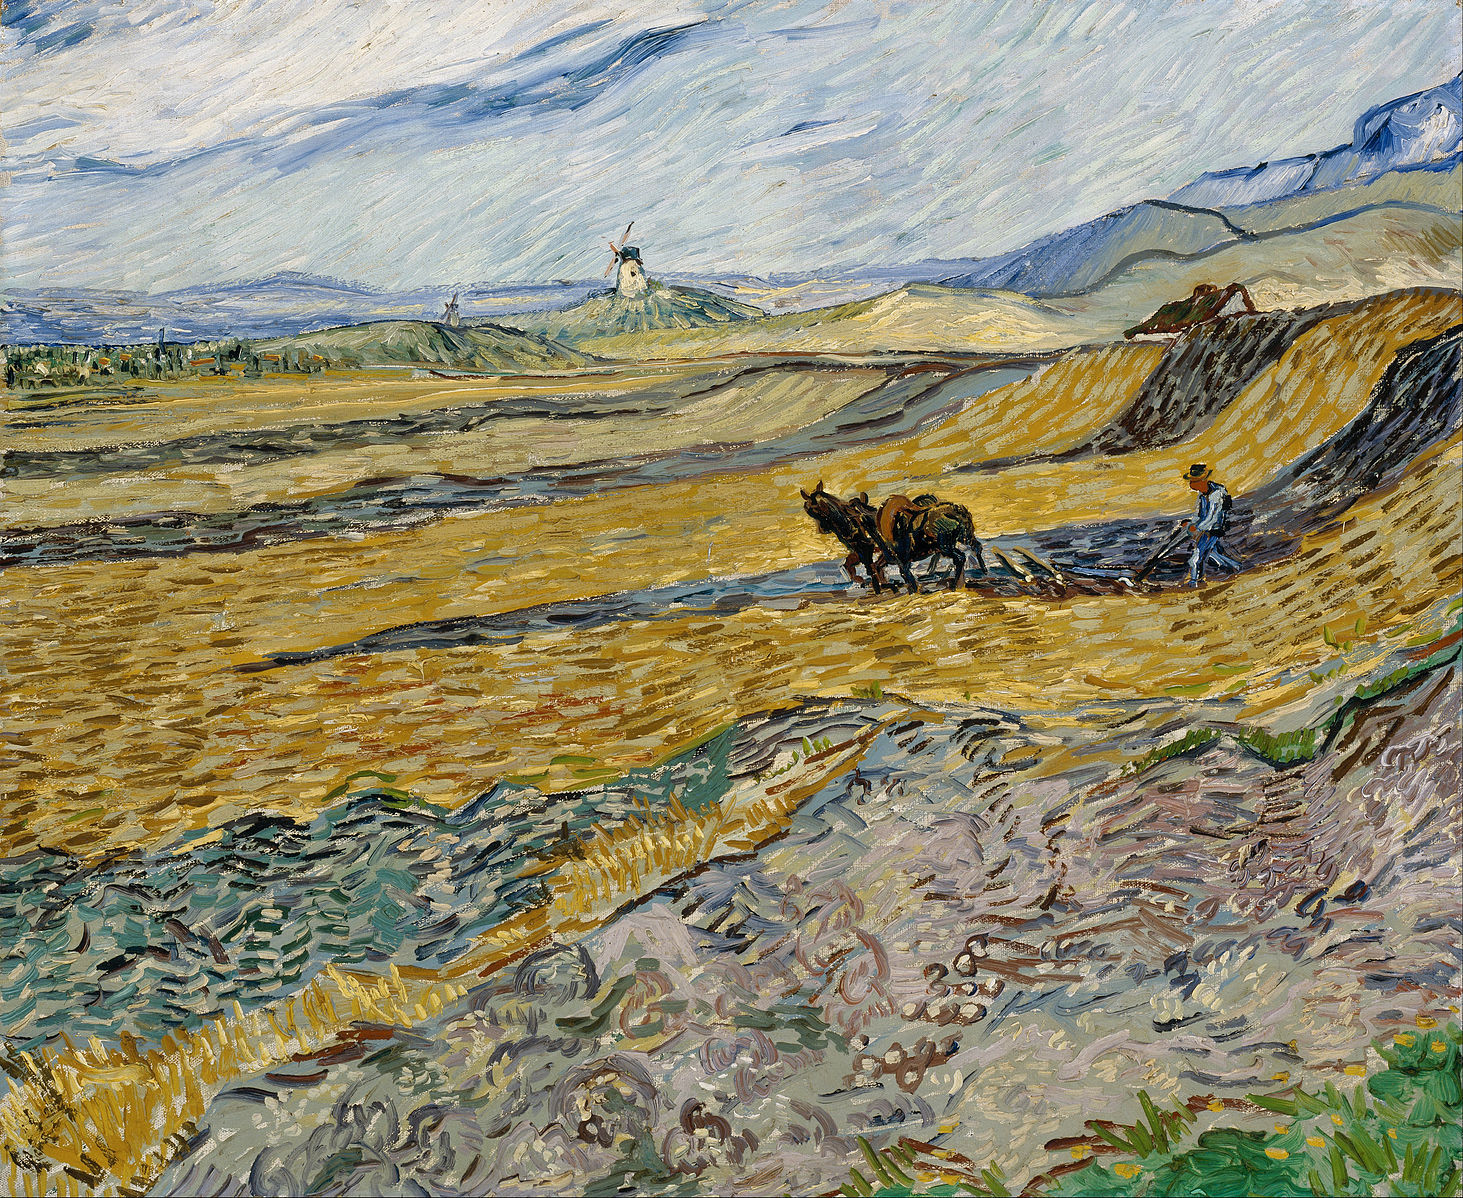 the painting Enclosed Field with Ploughman